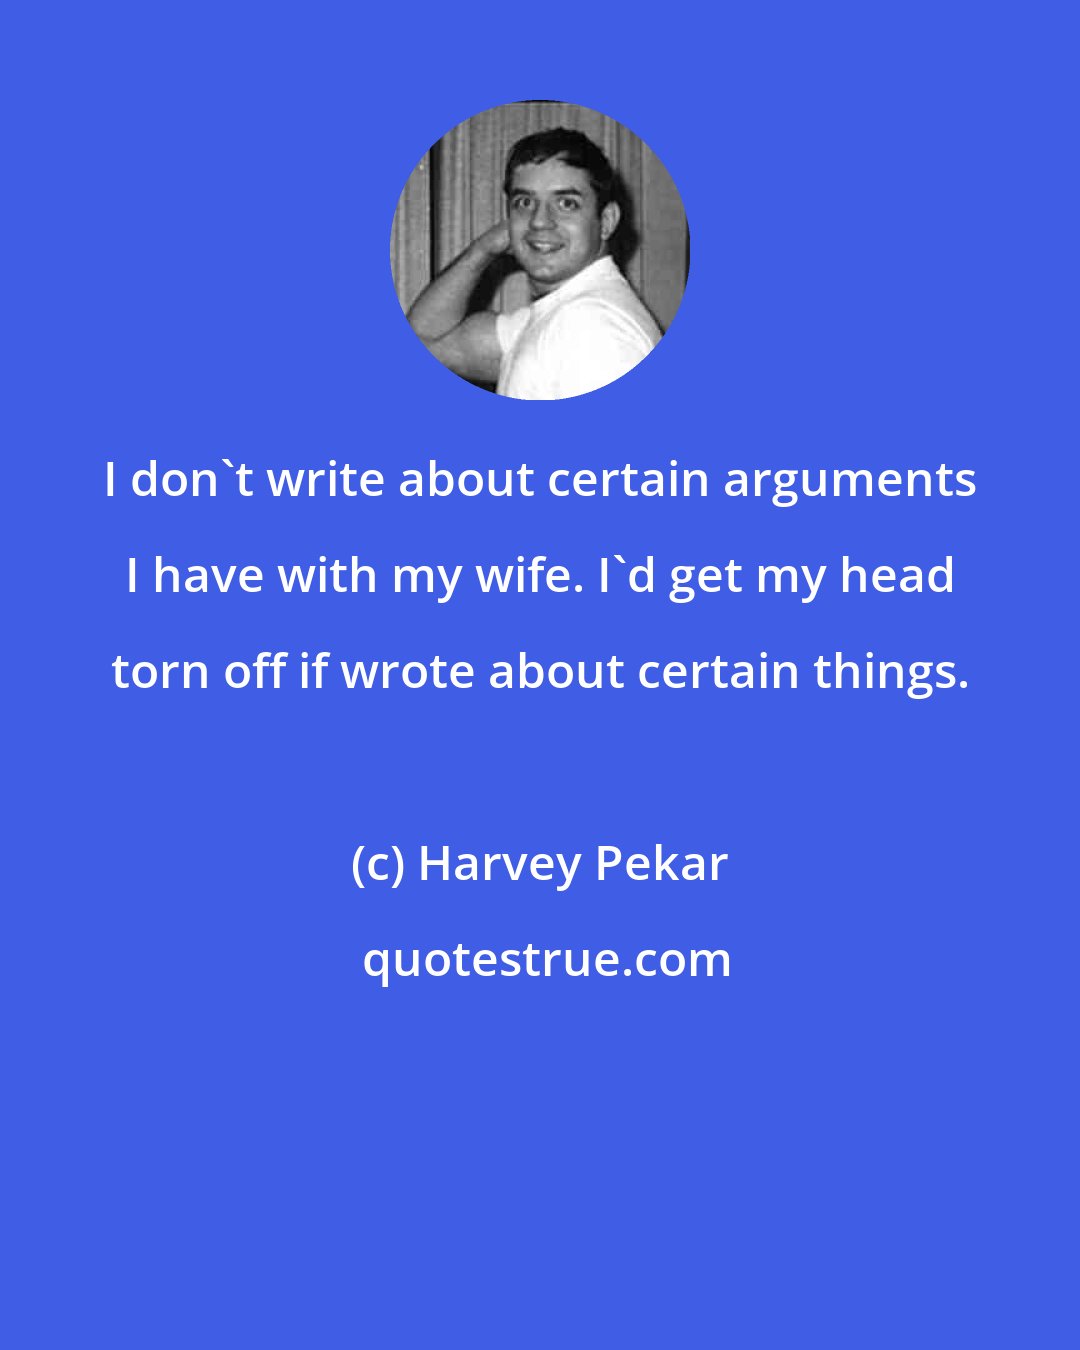 Harvey Pekar: I don't write about certain arguments I have with my wife. I'd get my head torn off if wrote about certain things.